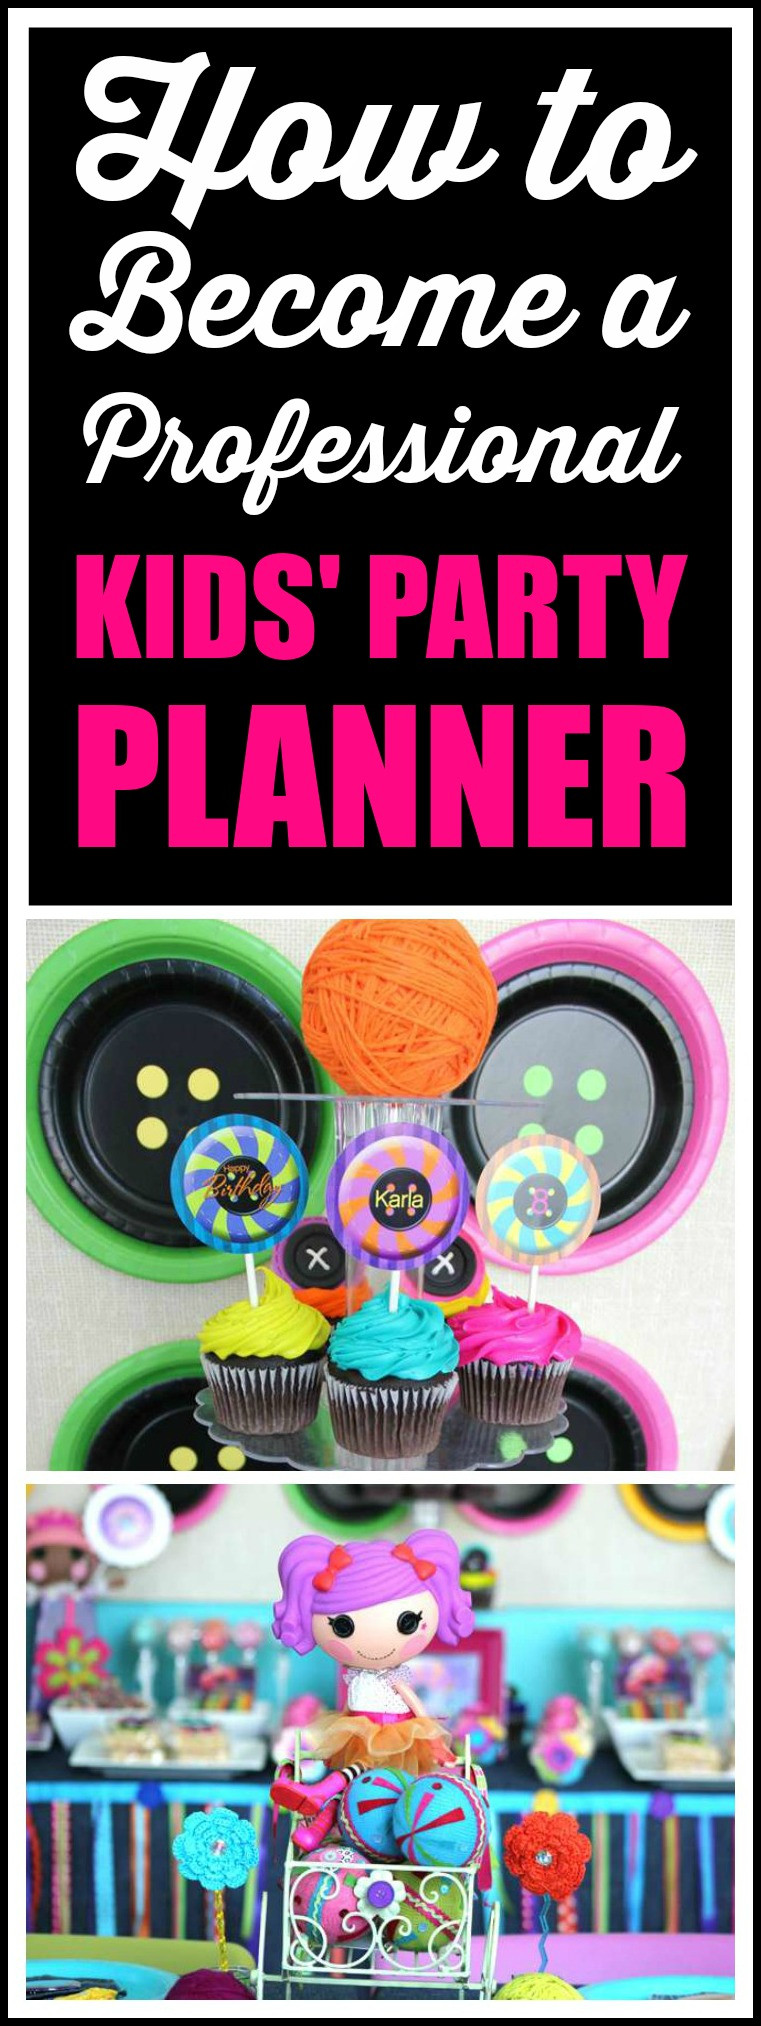 Kids Party Planner
 How to Be e a Professional Kids Party Planner